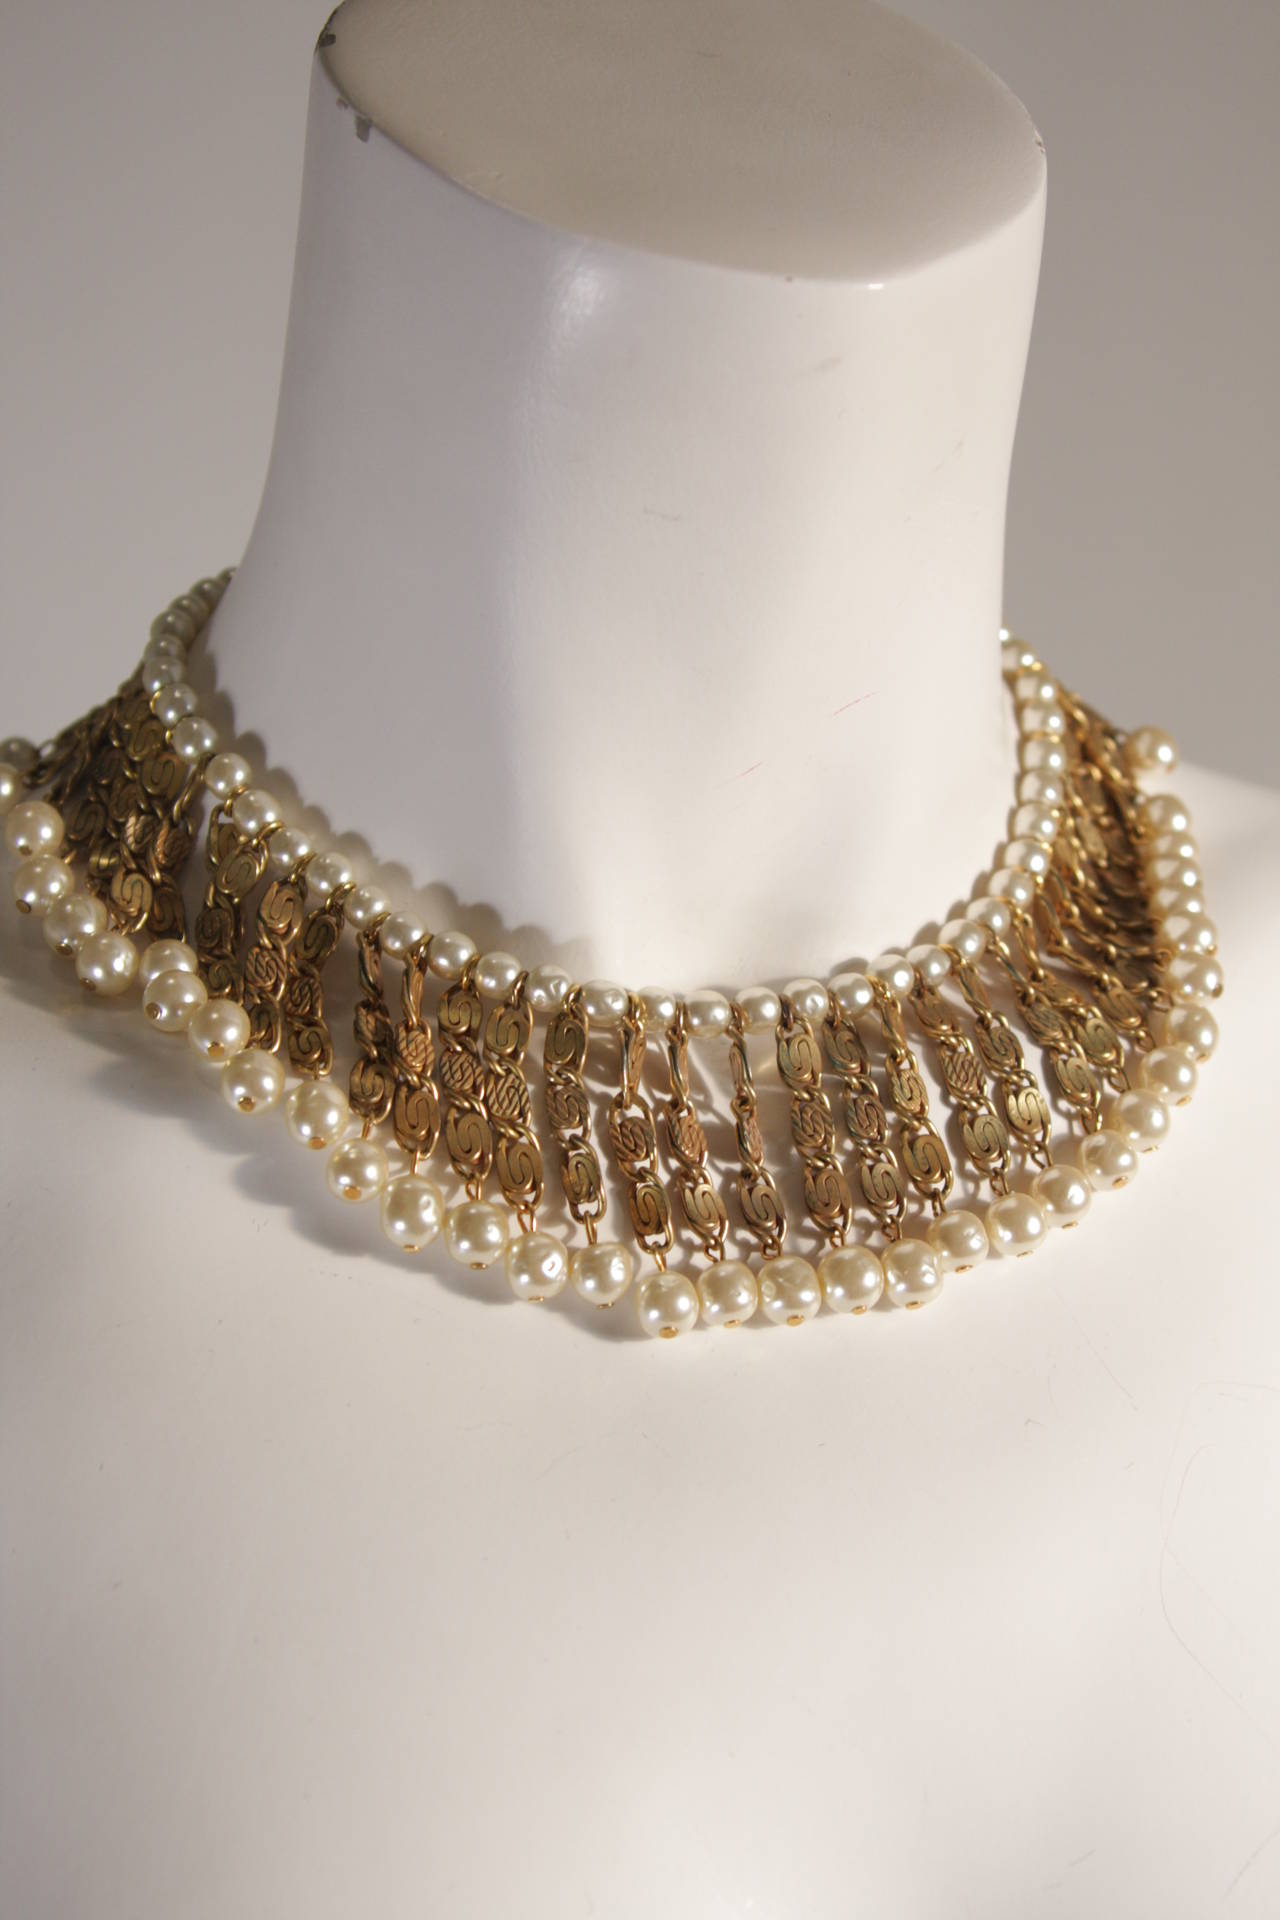 Etruscan Revival Miriam Haskell Stunning Gold Tone Metal & Faux Pearl Bib Style Choker